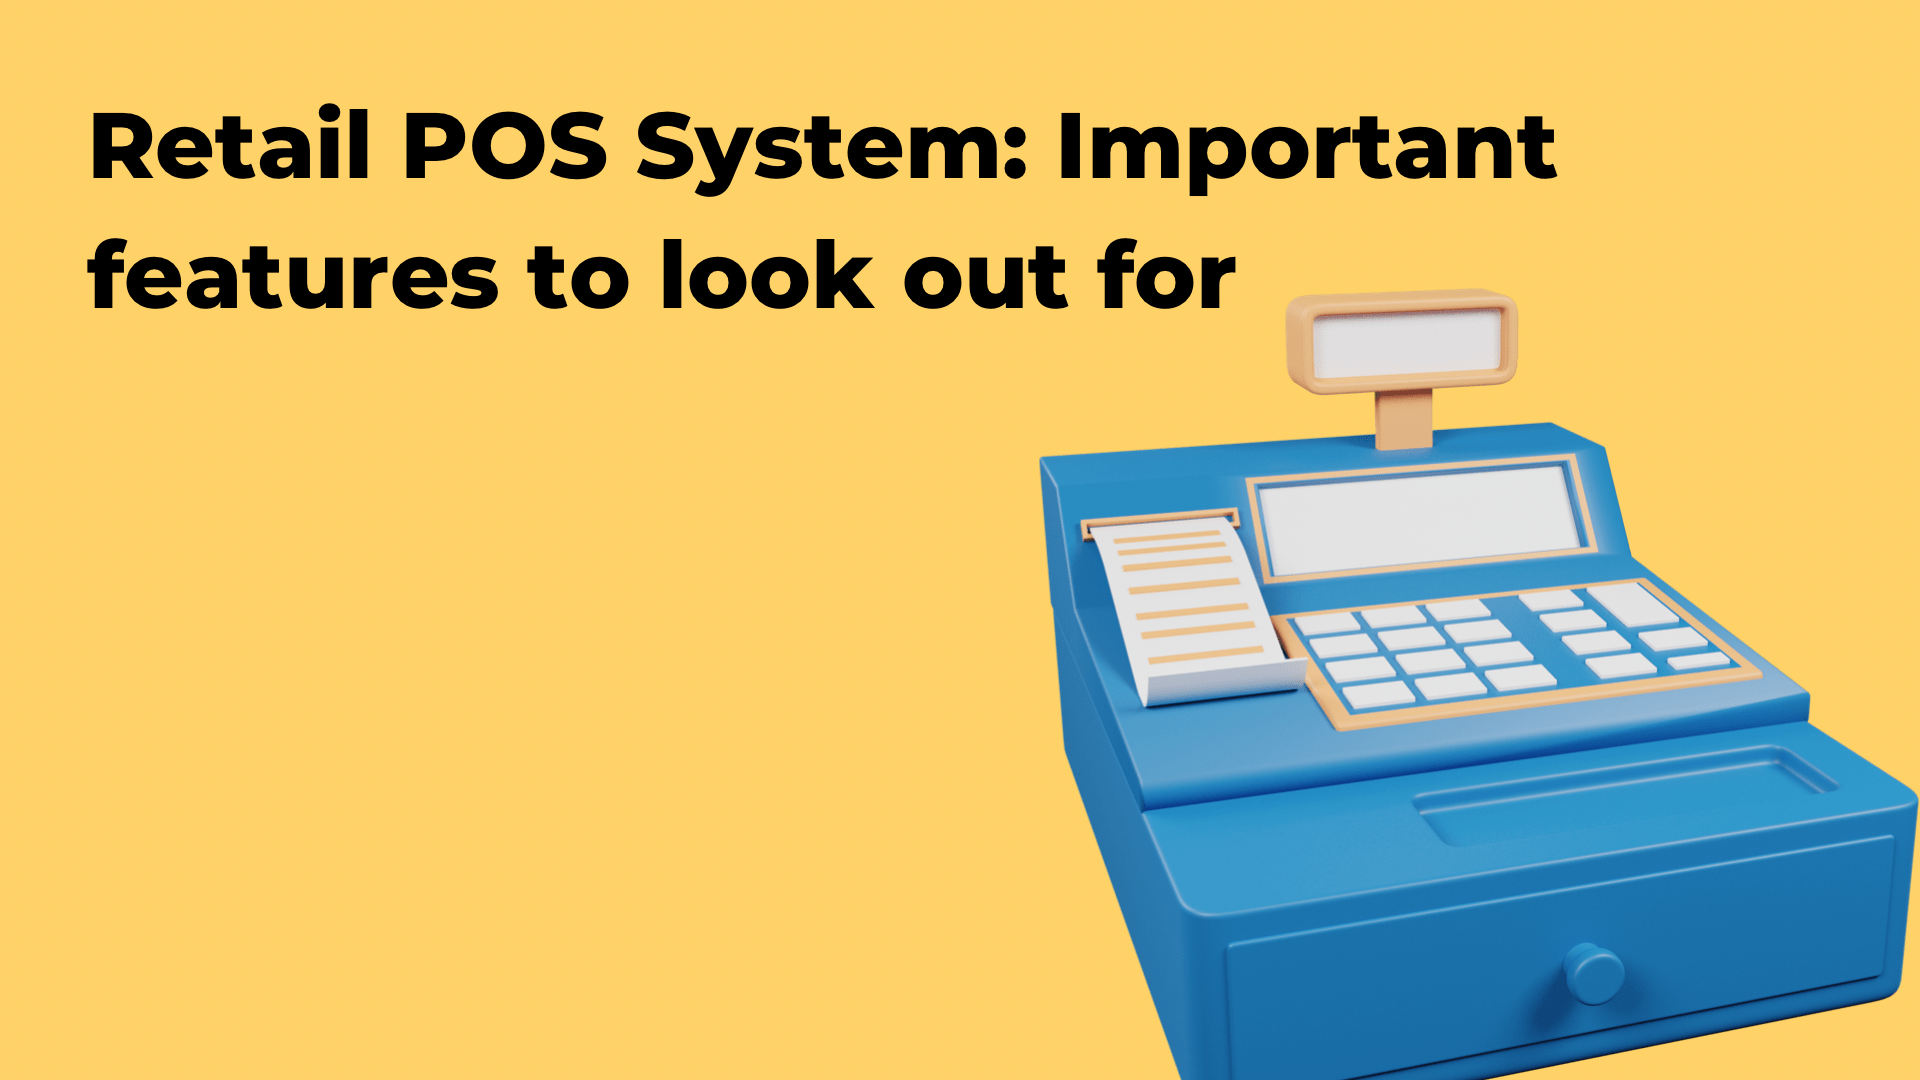 7 Important Features To Look For In A Retail POS System